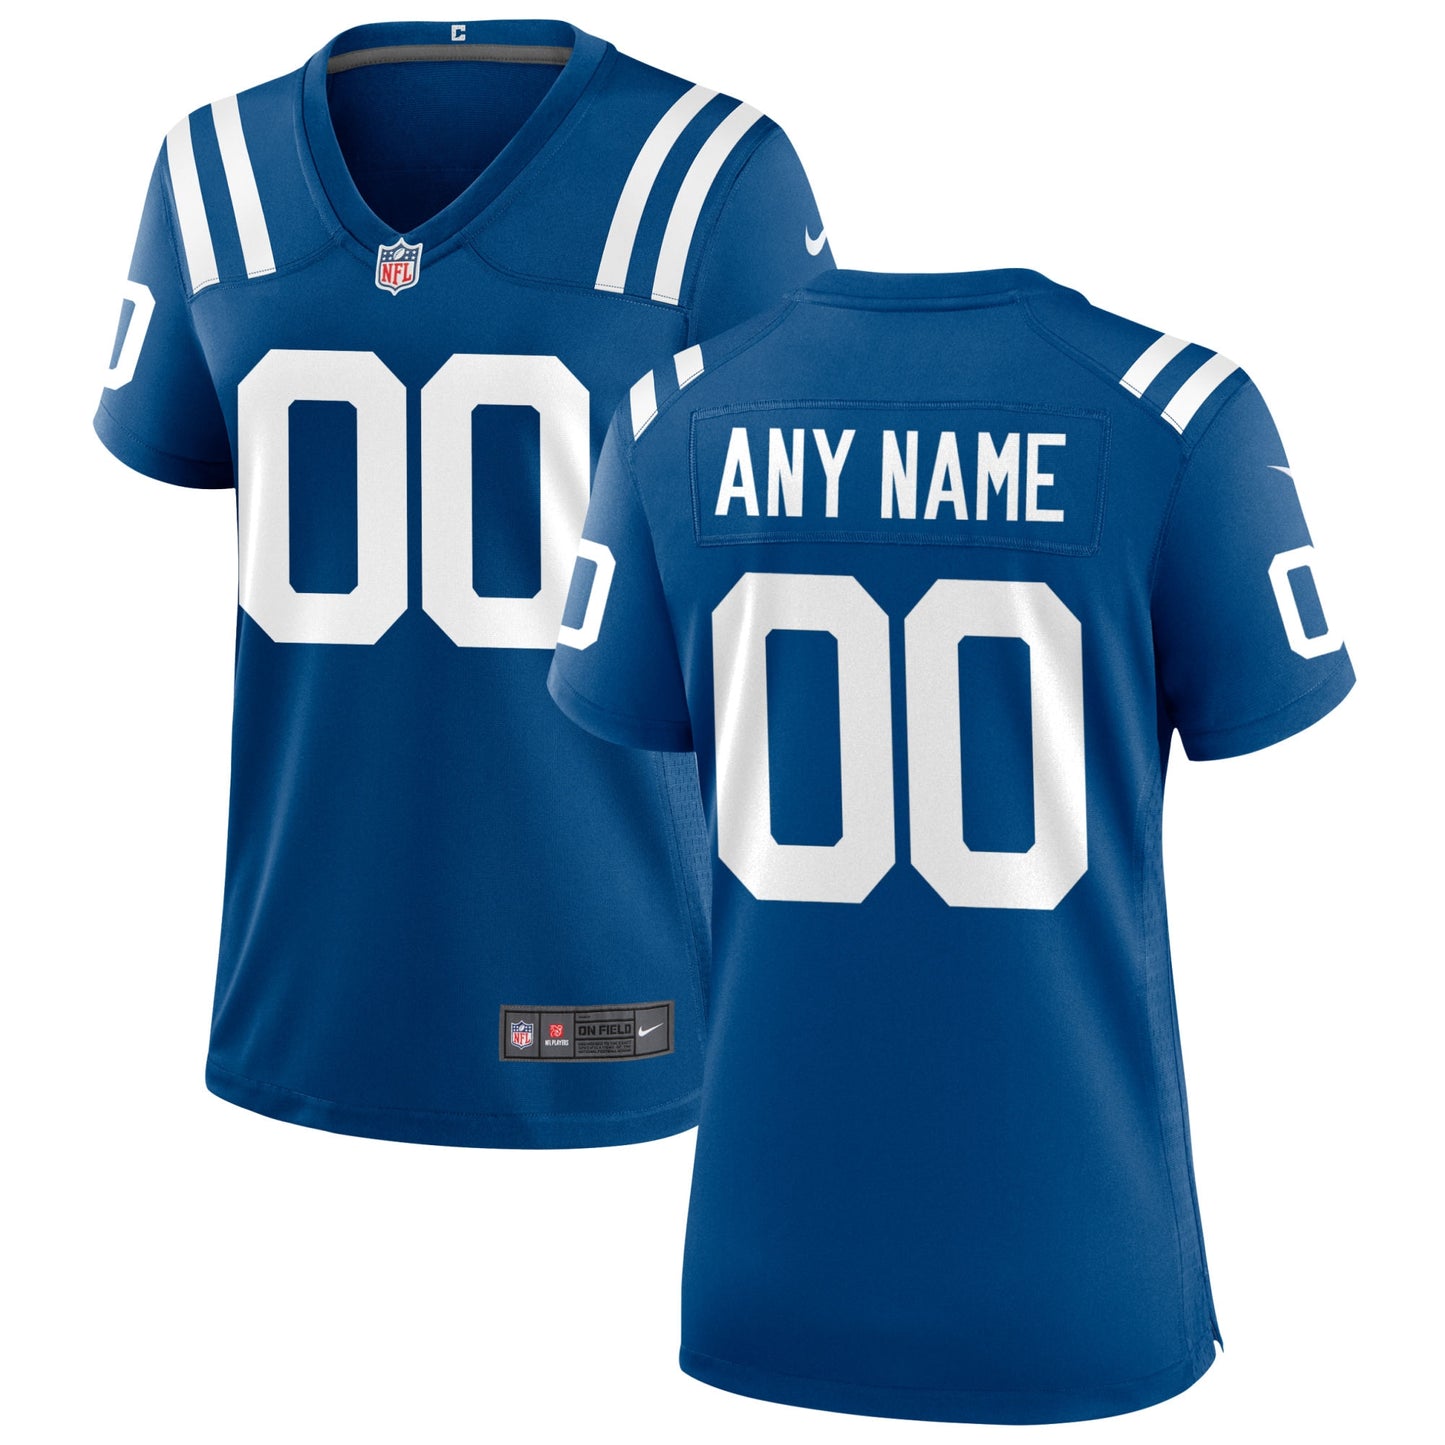 Nike Indianapolis Colts Women's Custom Game Jersey - Royal